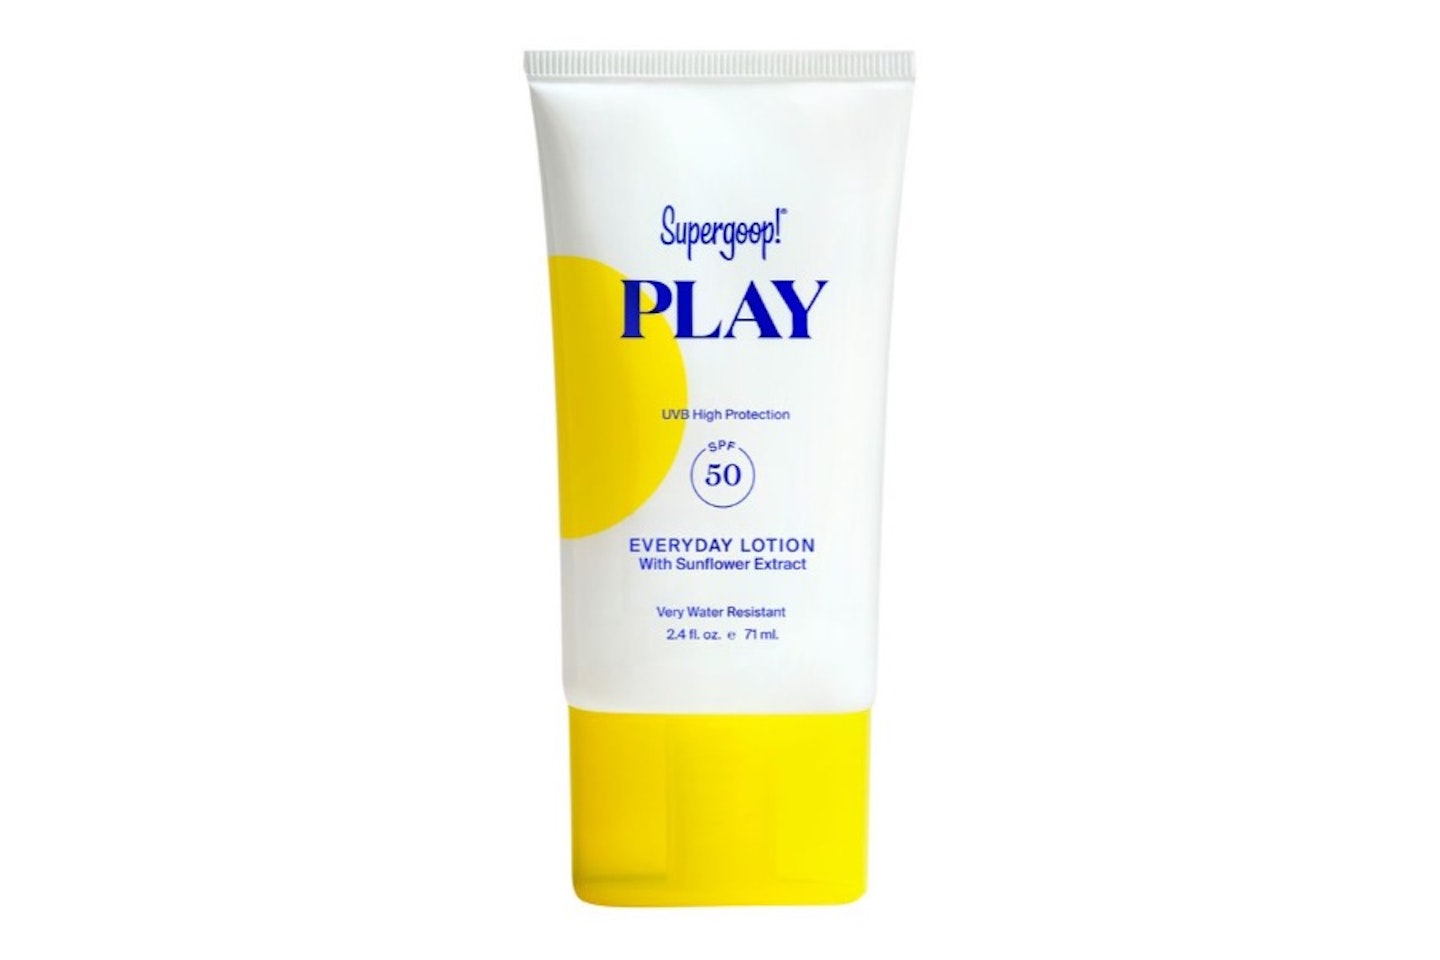 SUPERGOOP! Play Everyday Lotion SPF 50 with Sunflower Extract